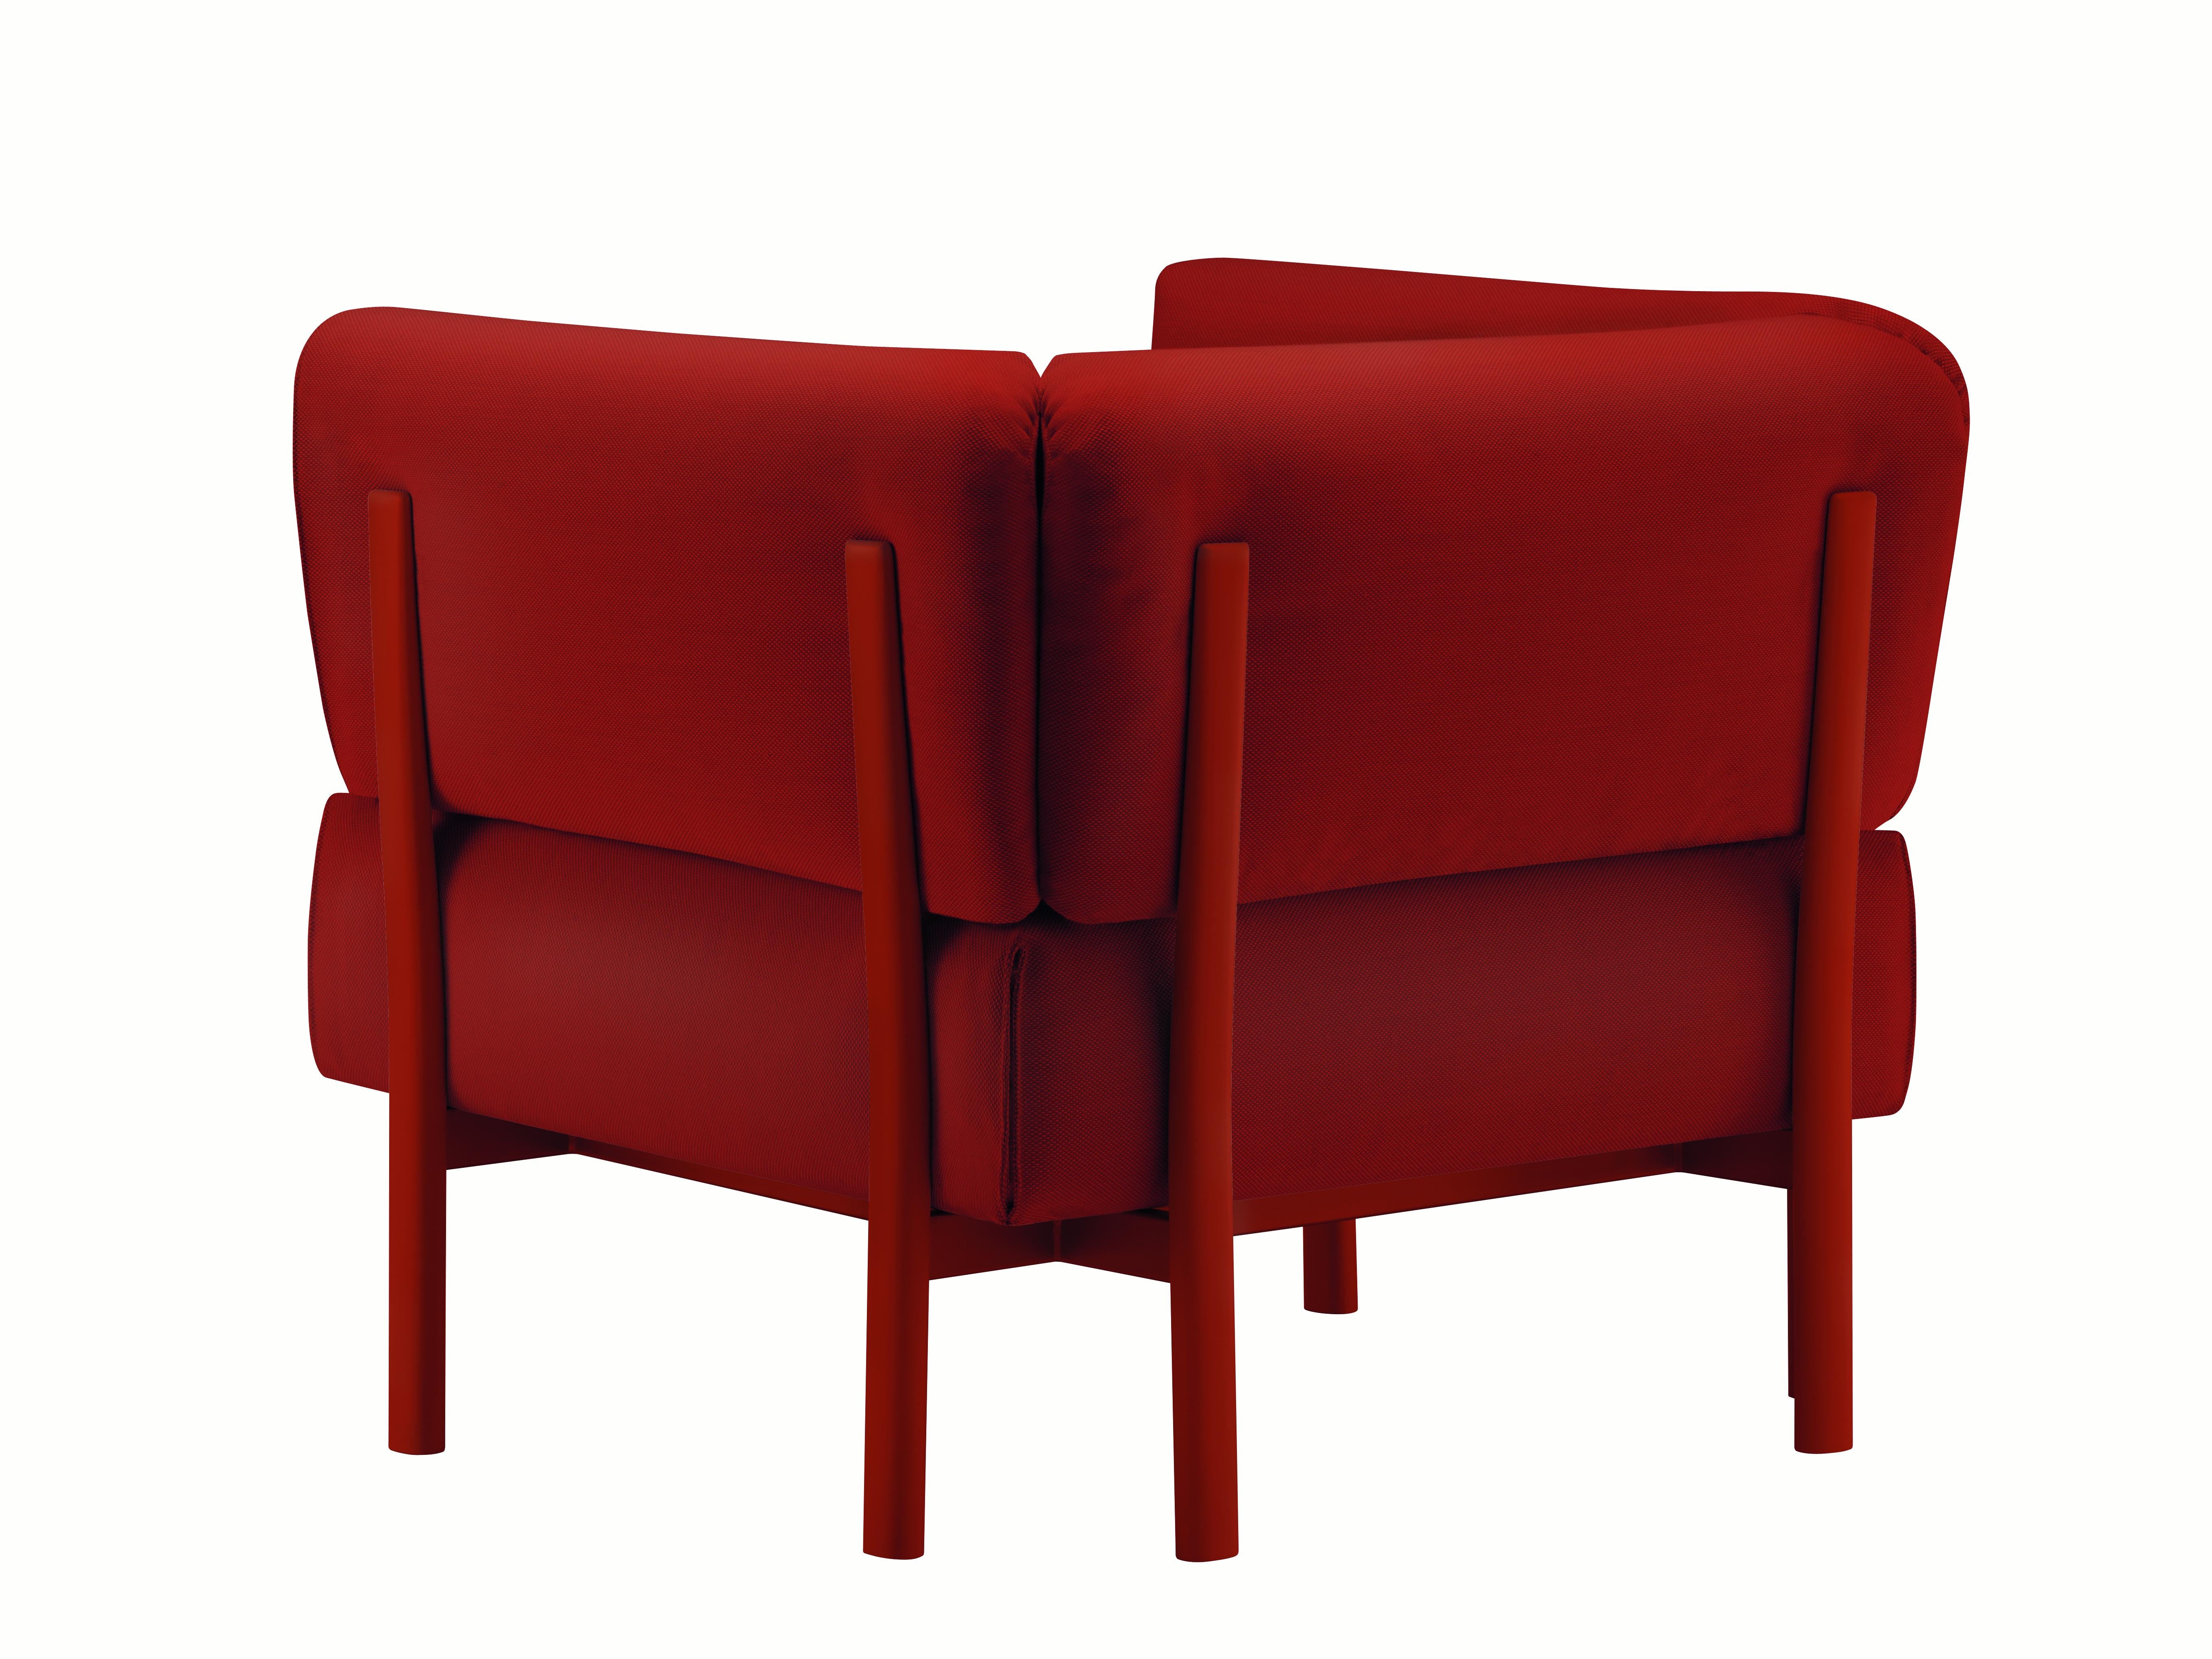 Alias 860 Eleven Armchair in Red Seat with Coral Red Lacquered Aluminum Frame by PearsonLloyd

Armchair with die-cast aluminium legs and steel frame with elastic belts. Seat cushion, back and arms in polyurethane with removable cover in fabric or